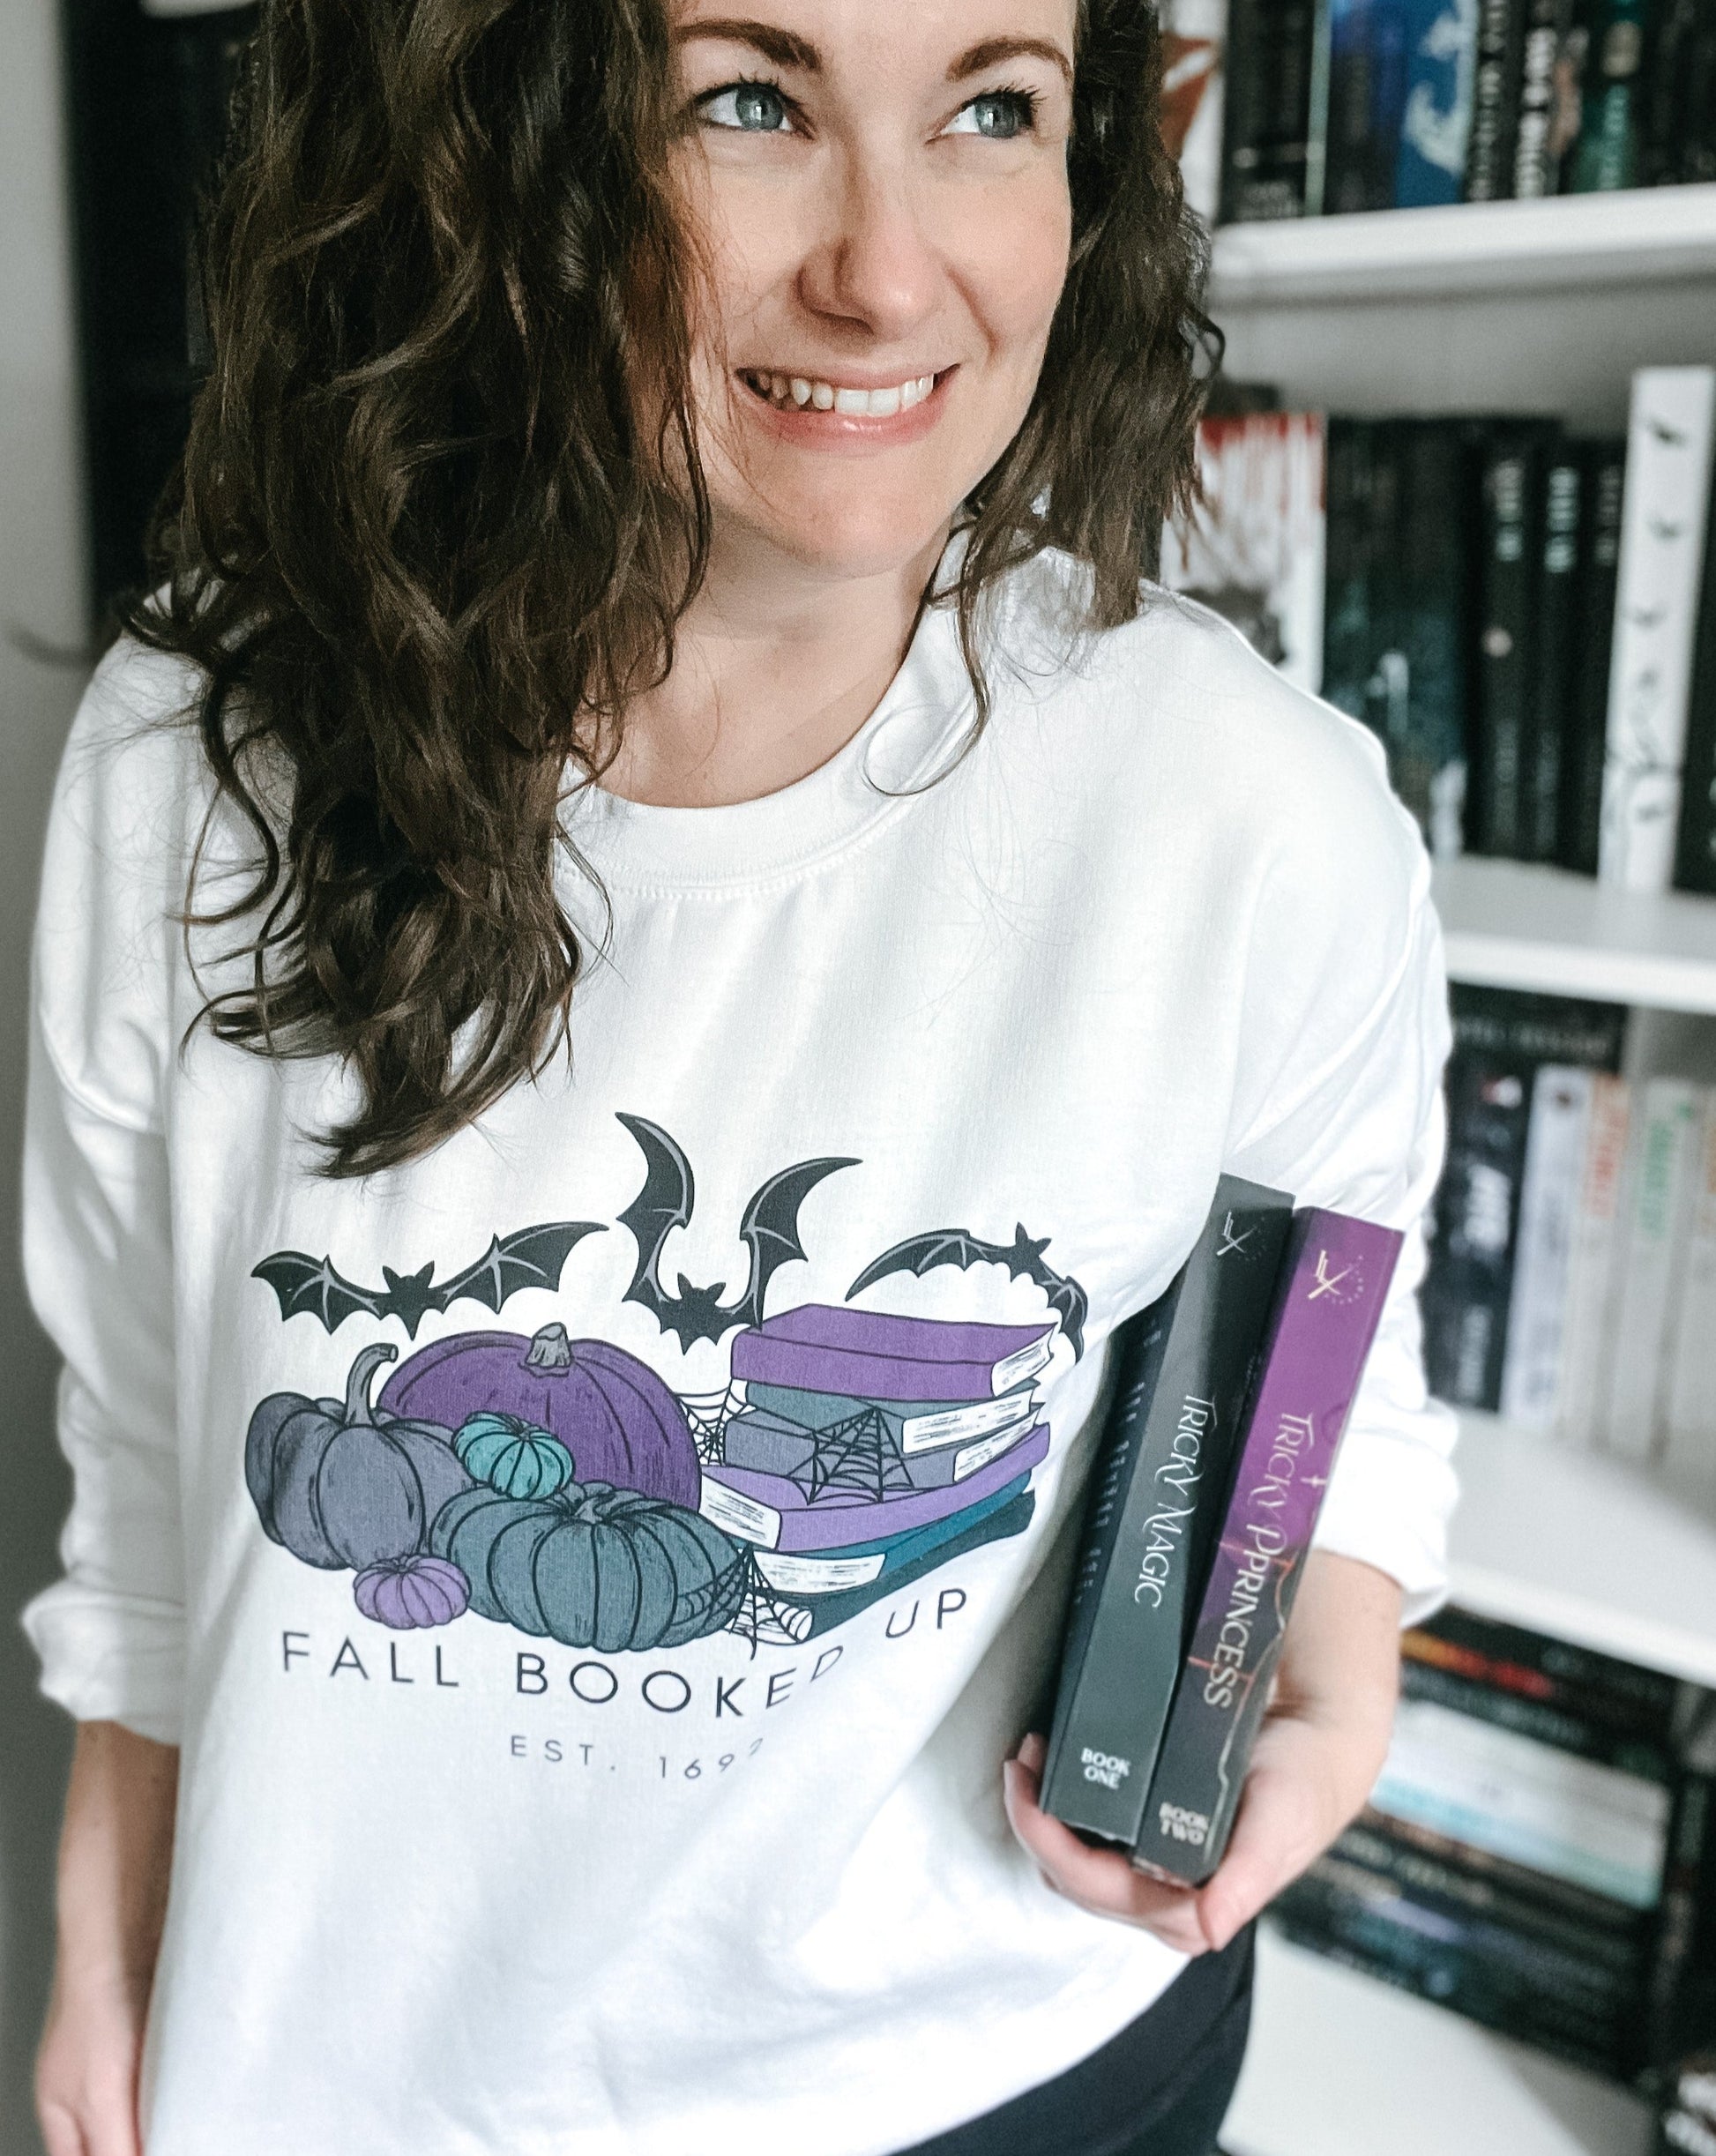 White Fall Booked Up sweatshirt with purple books by FireDrake Artistry™. Photo by @athousandbookishlives